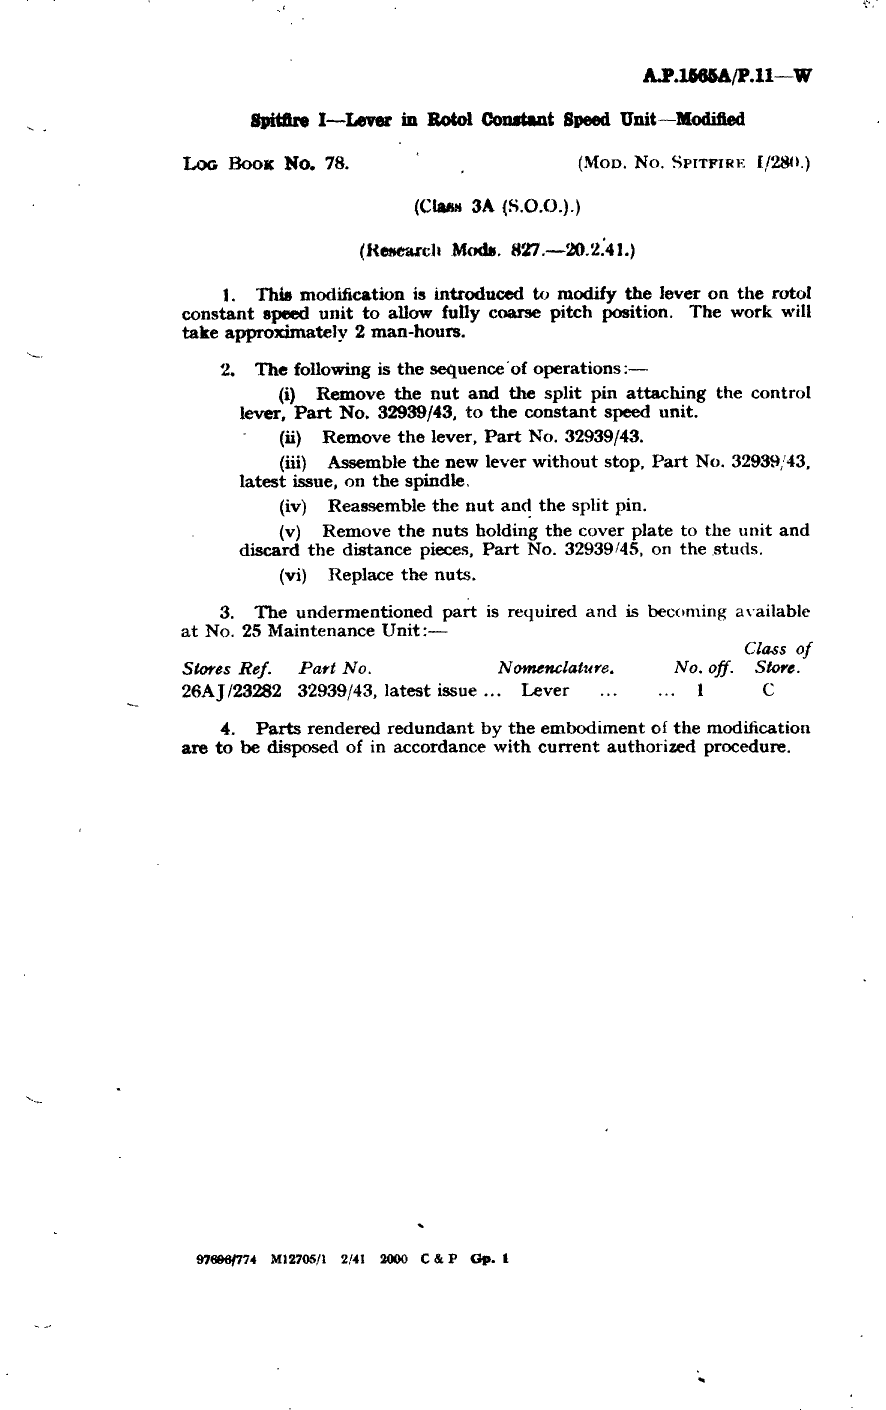 Sample page 1 from AirCorps Library document: Spitfire I Lever In Rotol Constant Speed Unit Modified